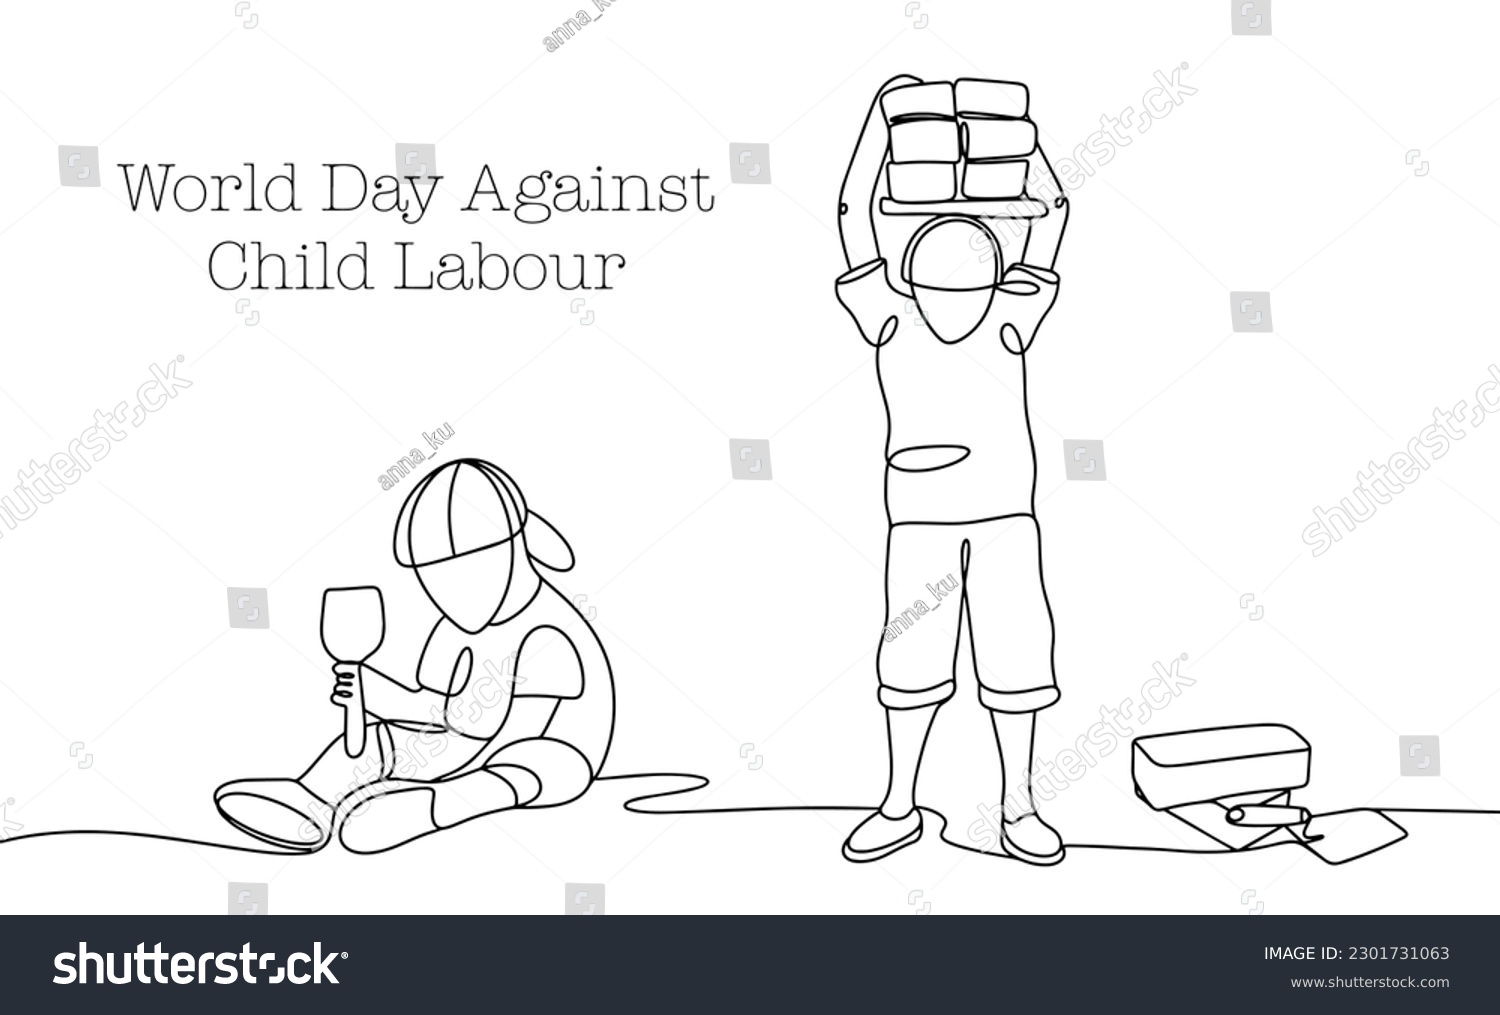 SVG of One boy is playing in the sandbox, and the other is working hard. Child labour. World Day Against Child Labour. One line drawing for different uses. Vector illustration. svg